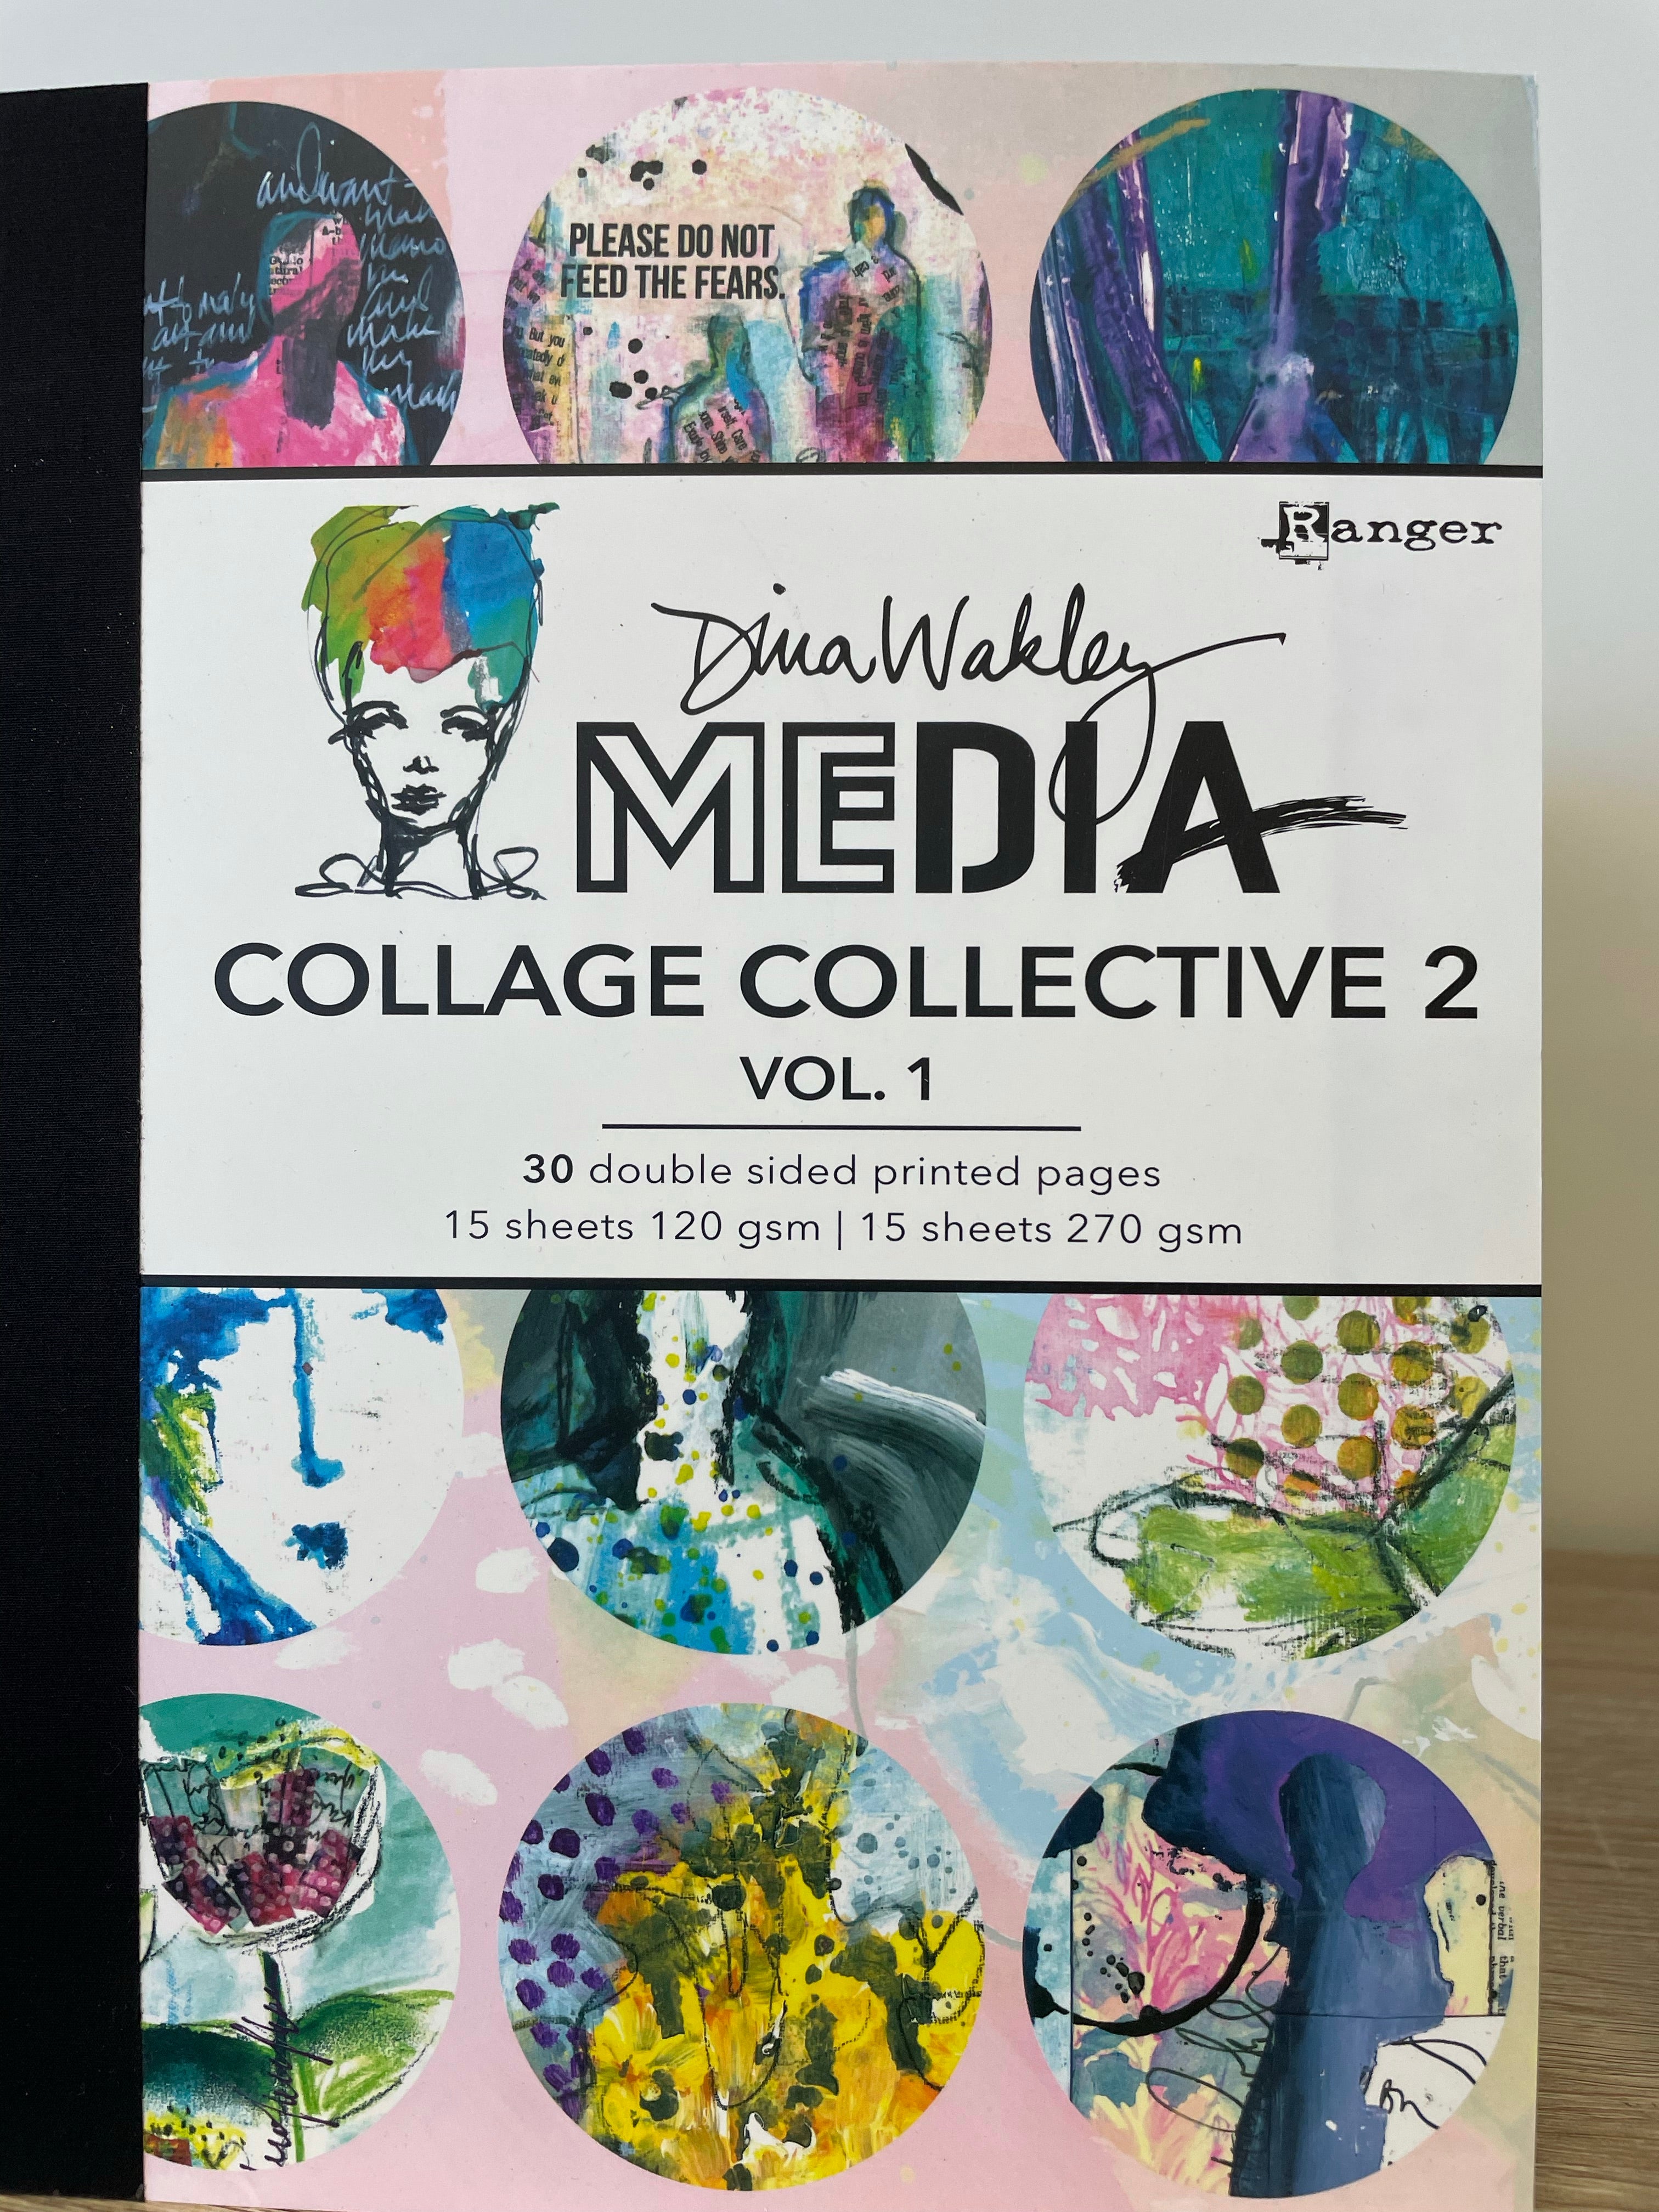 Dina Wakley Media Collage Collective 2, Volume 1